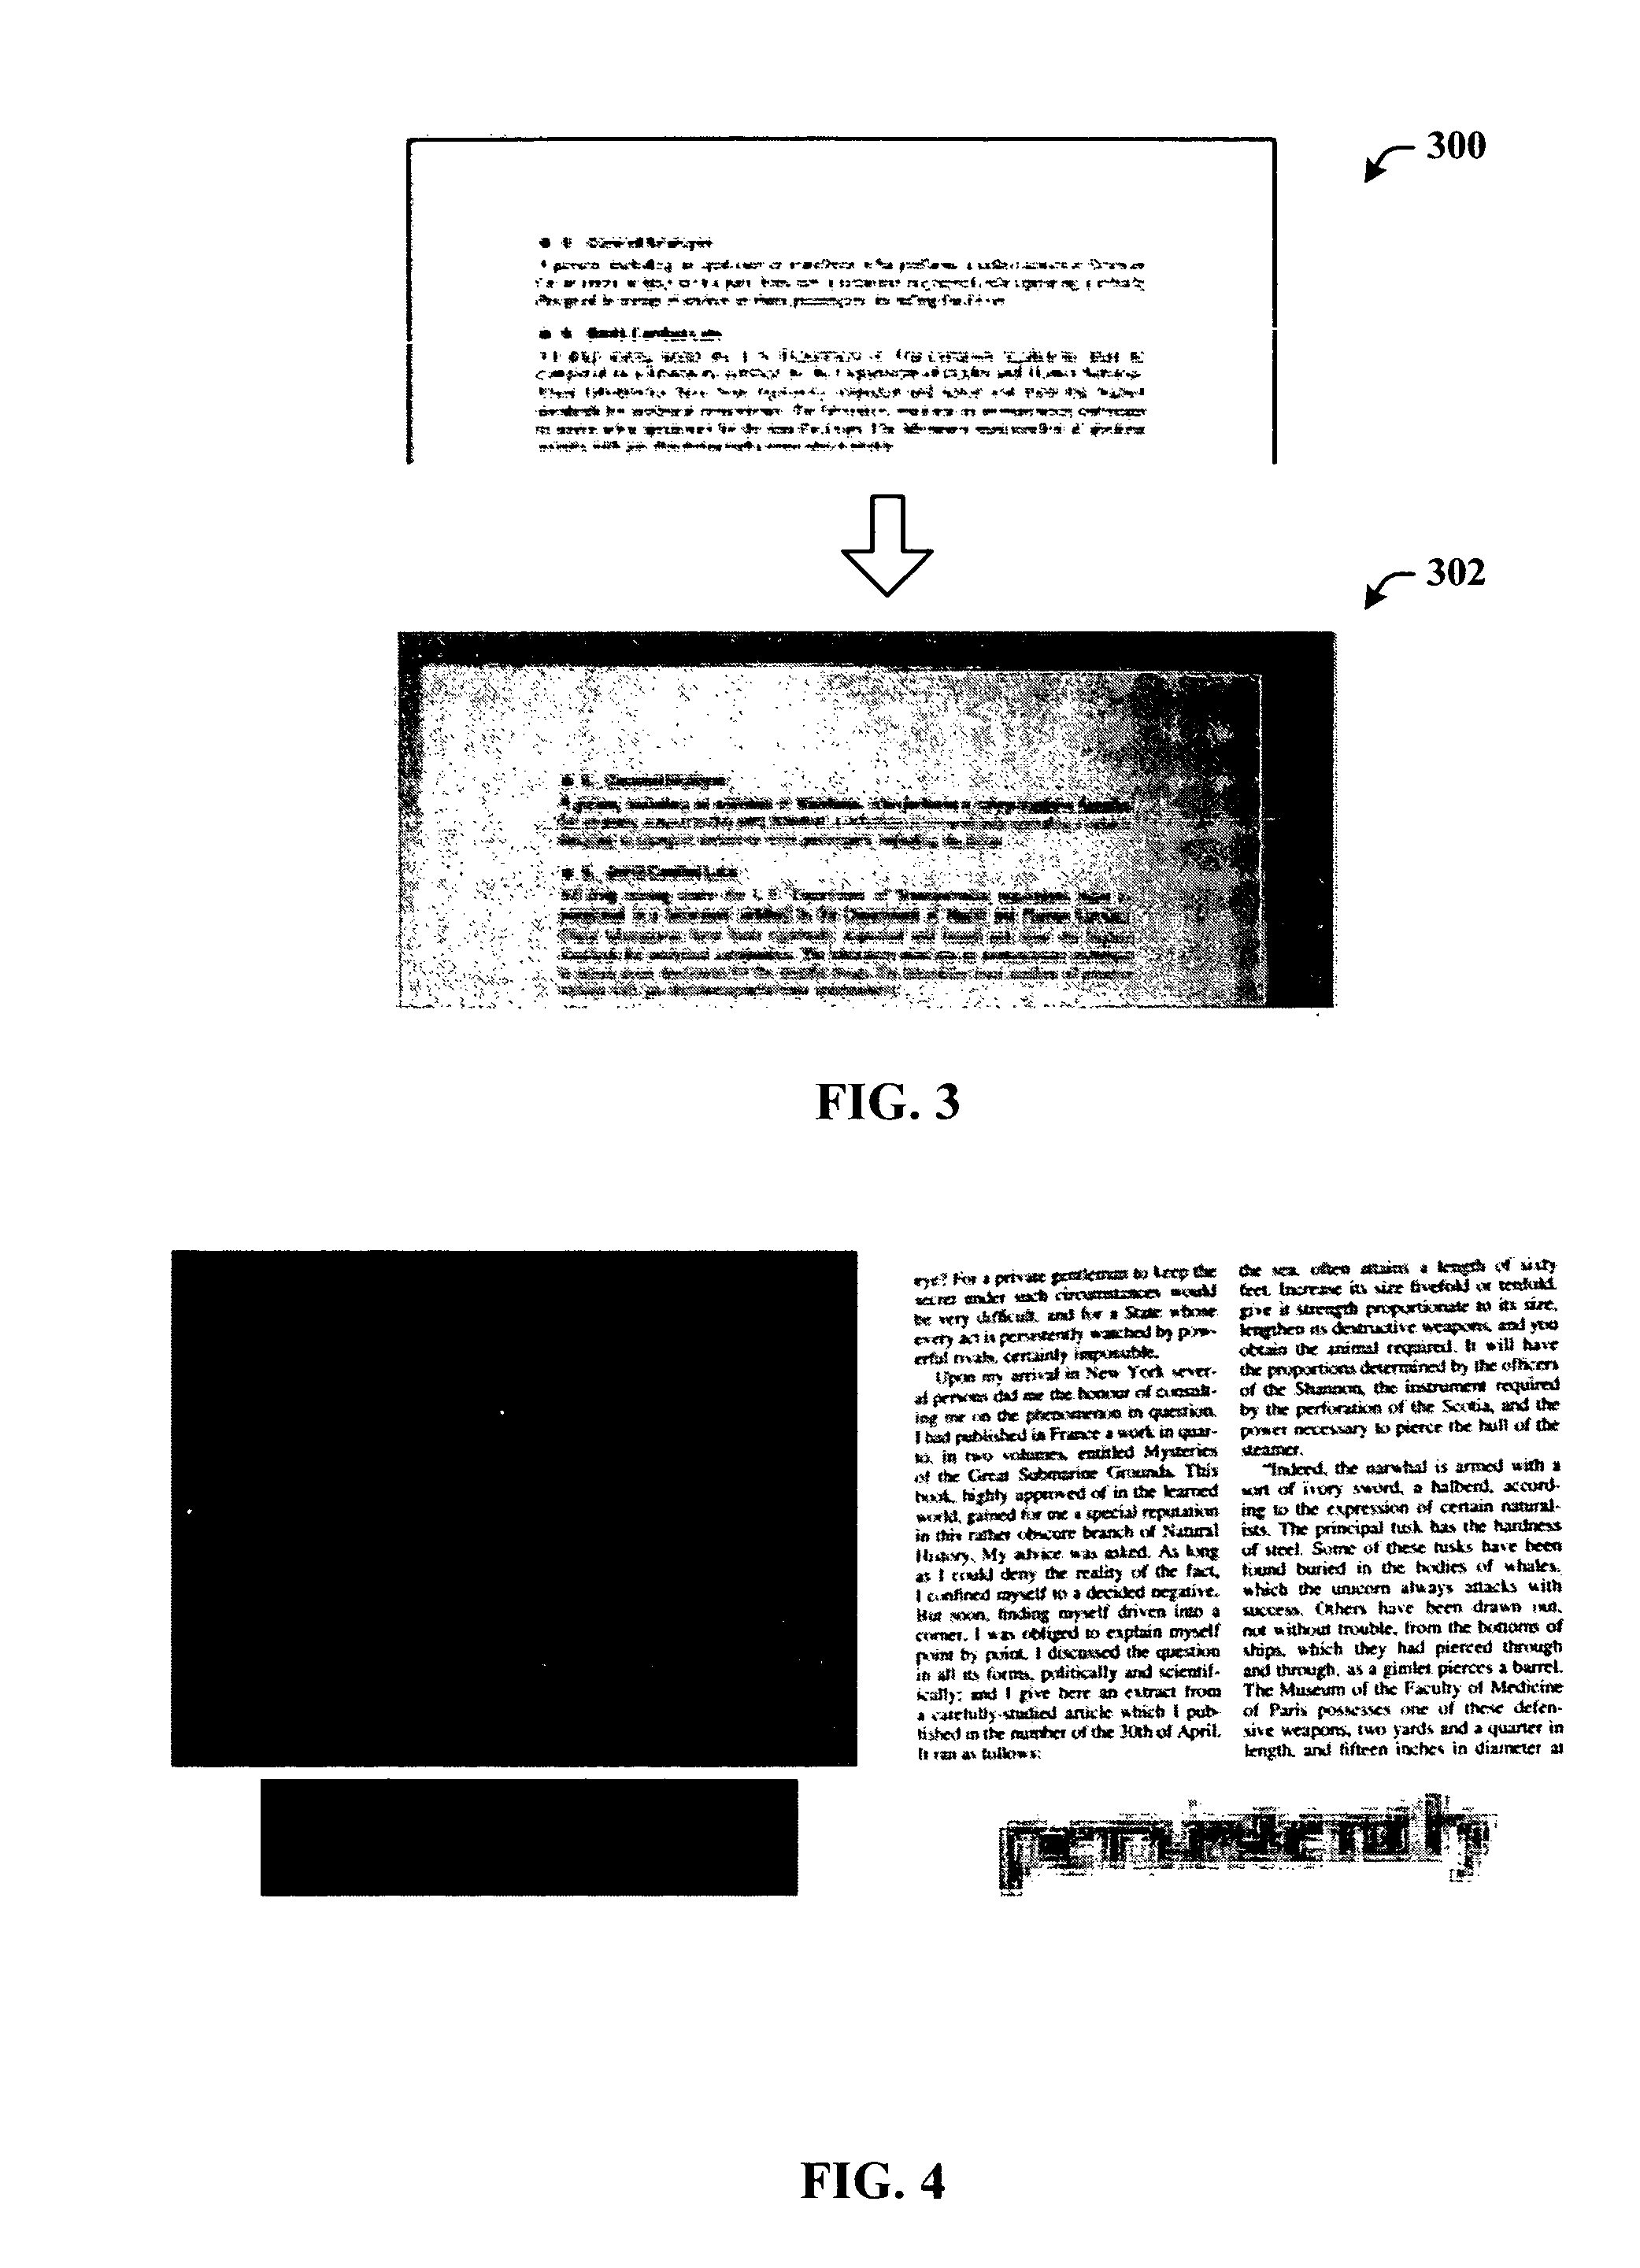 Low resolution OCR for camera acquired documents